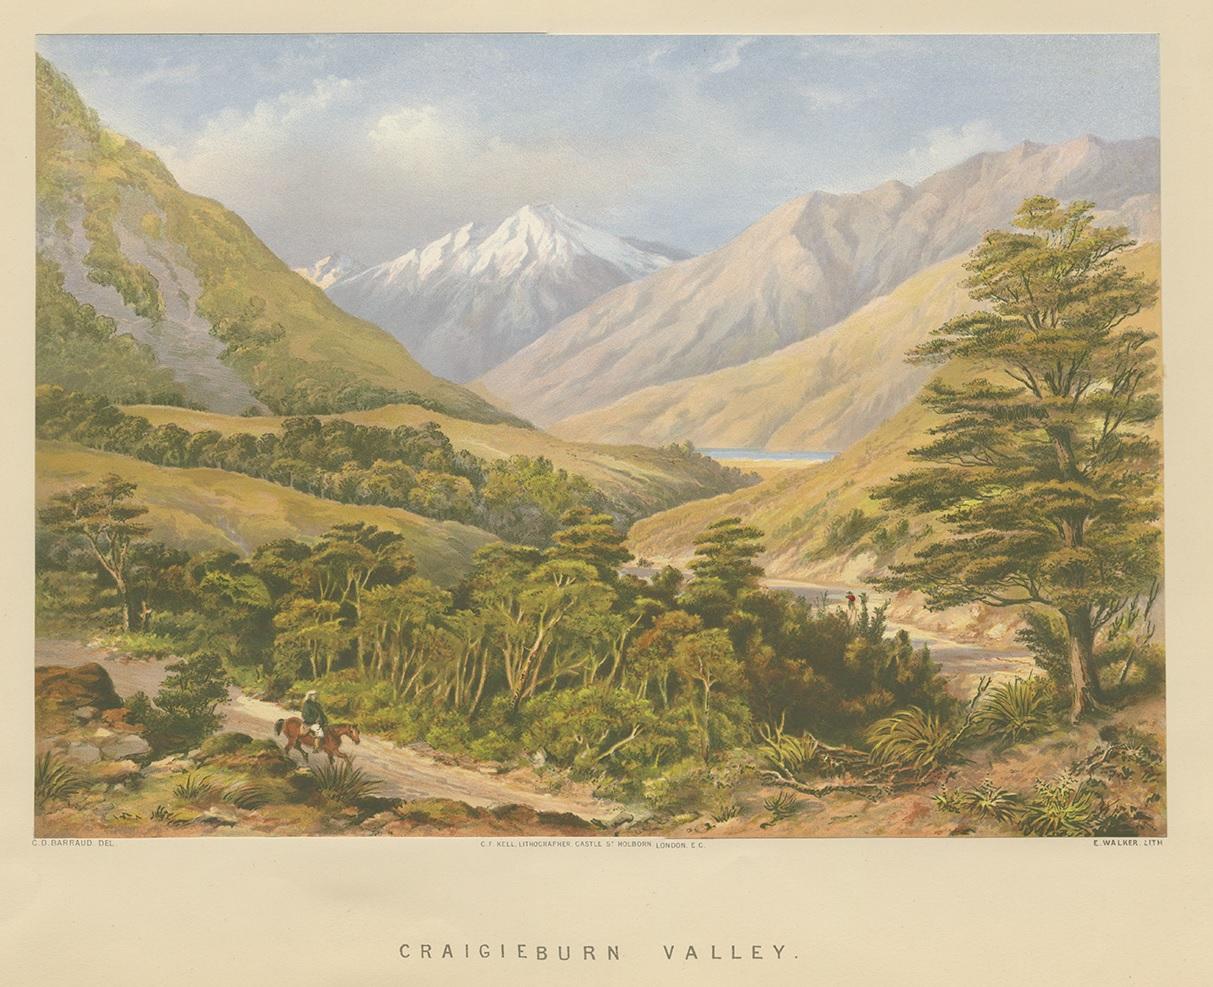 Antique print titled 'Craigieburn Valley'. View of Craigieburn Valley, New Zealand. Lithographed by E. Walker after a drawing by Barraud. This print originates from 'New Zealand: Graphic and Descriptive', circa 1877.